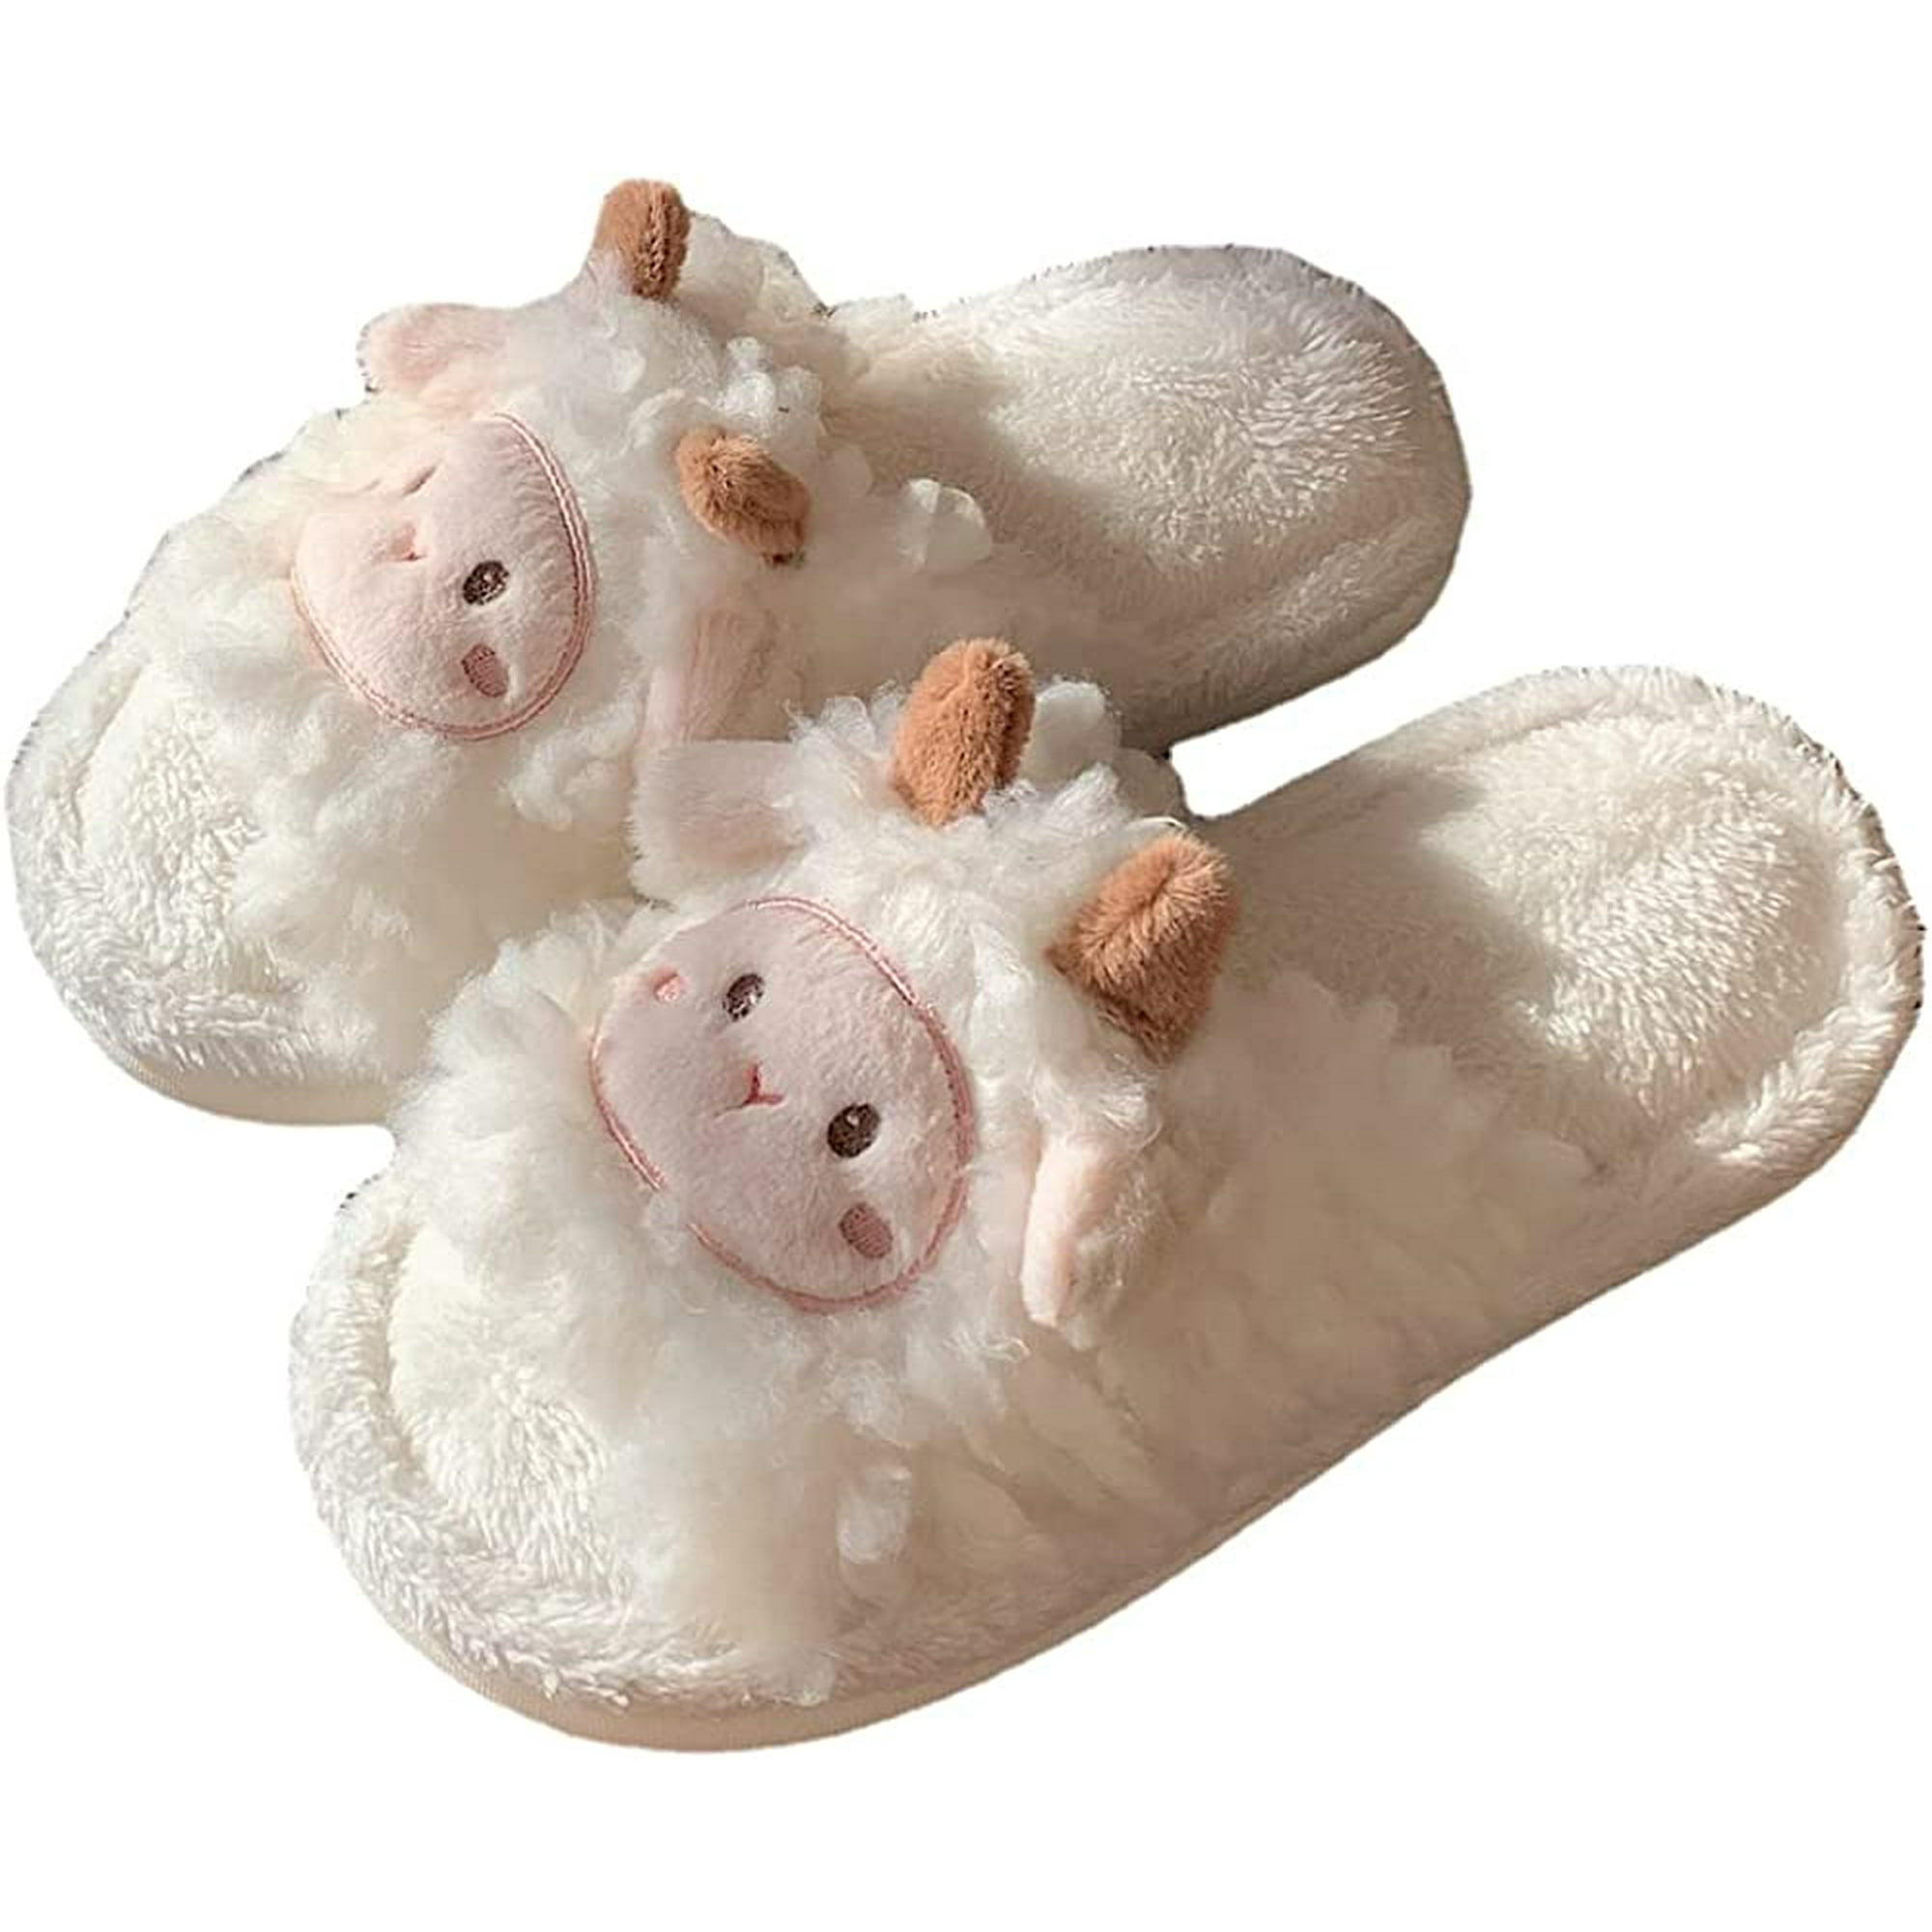 These Fuzzy Slippers Are on Sale at